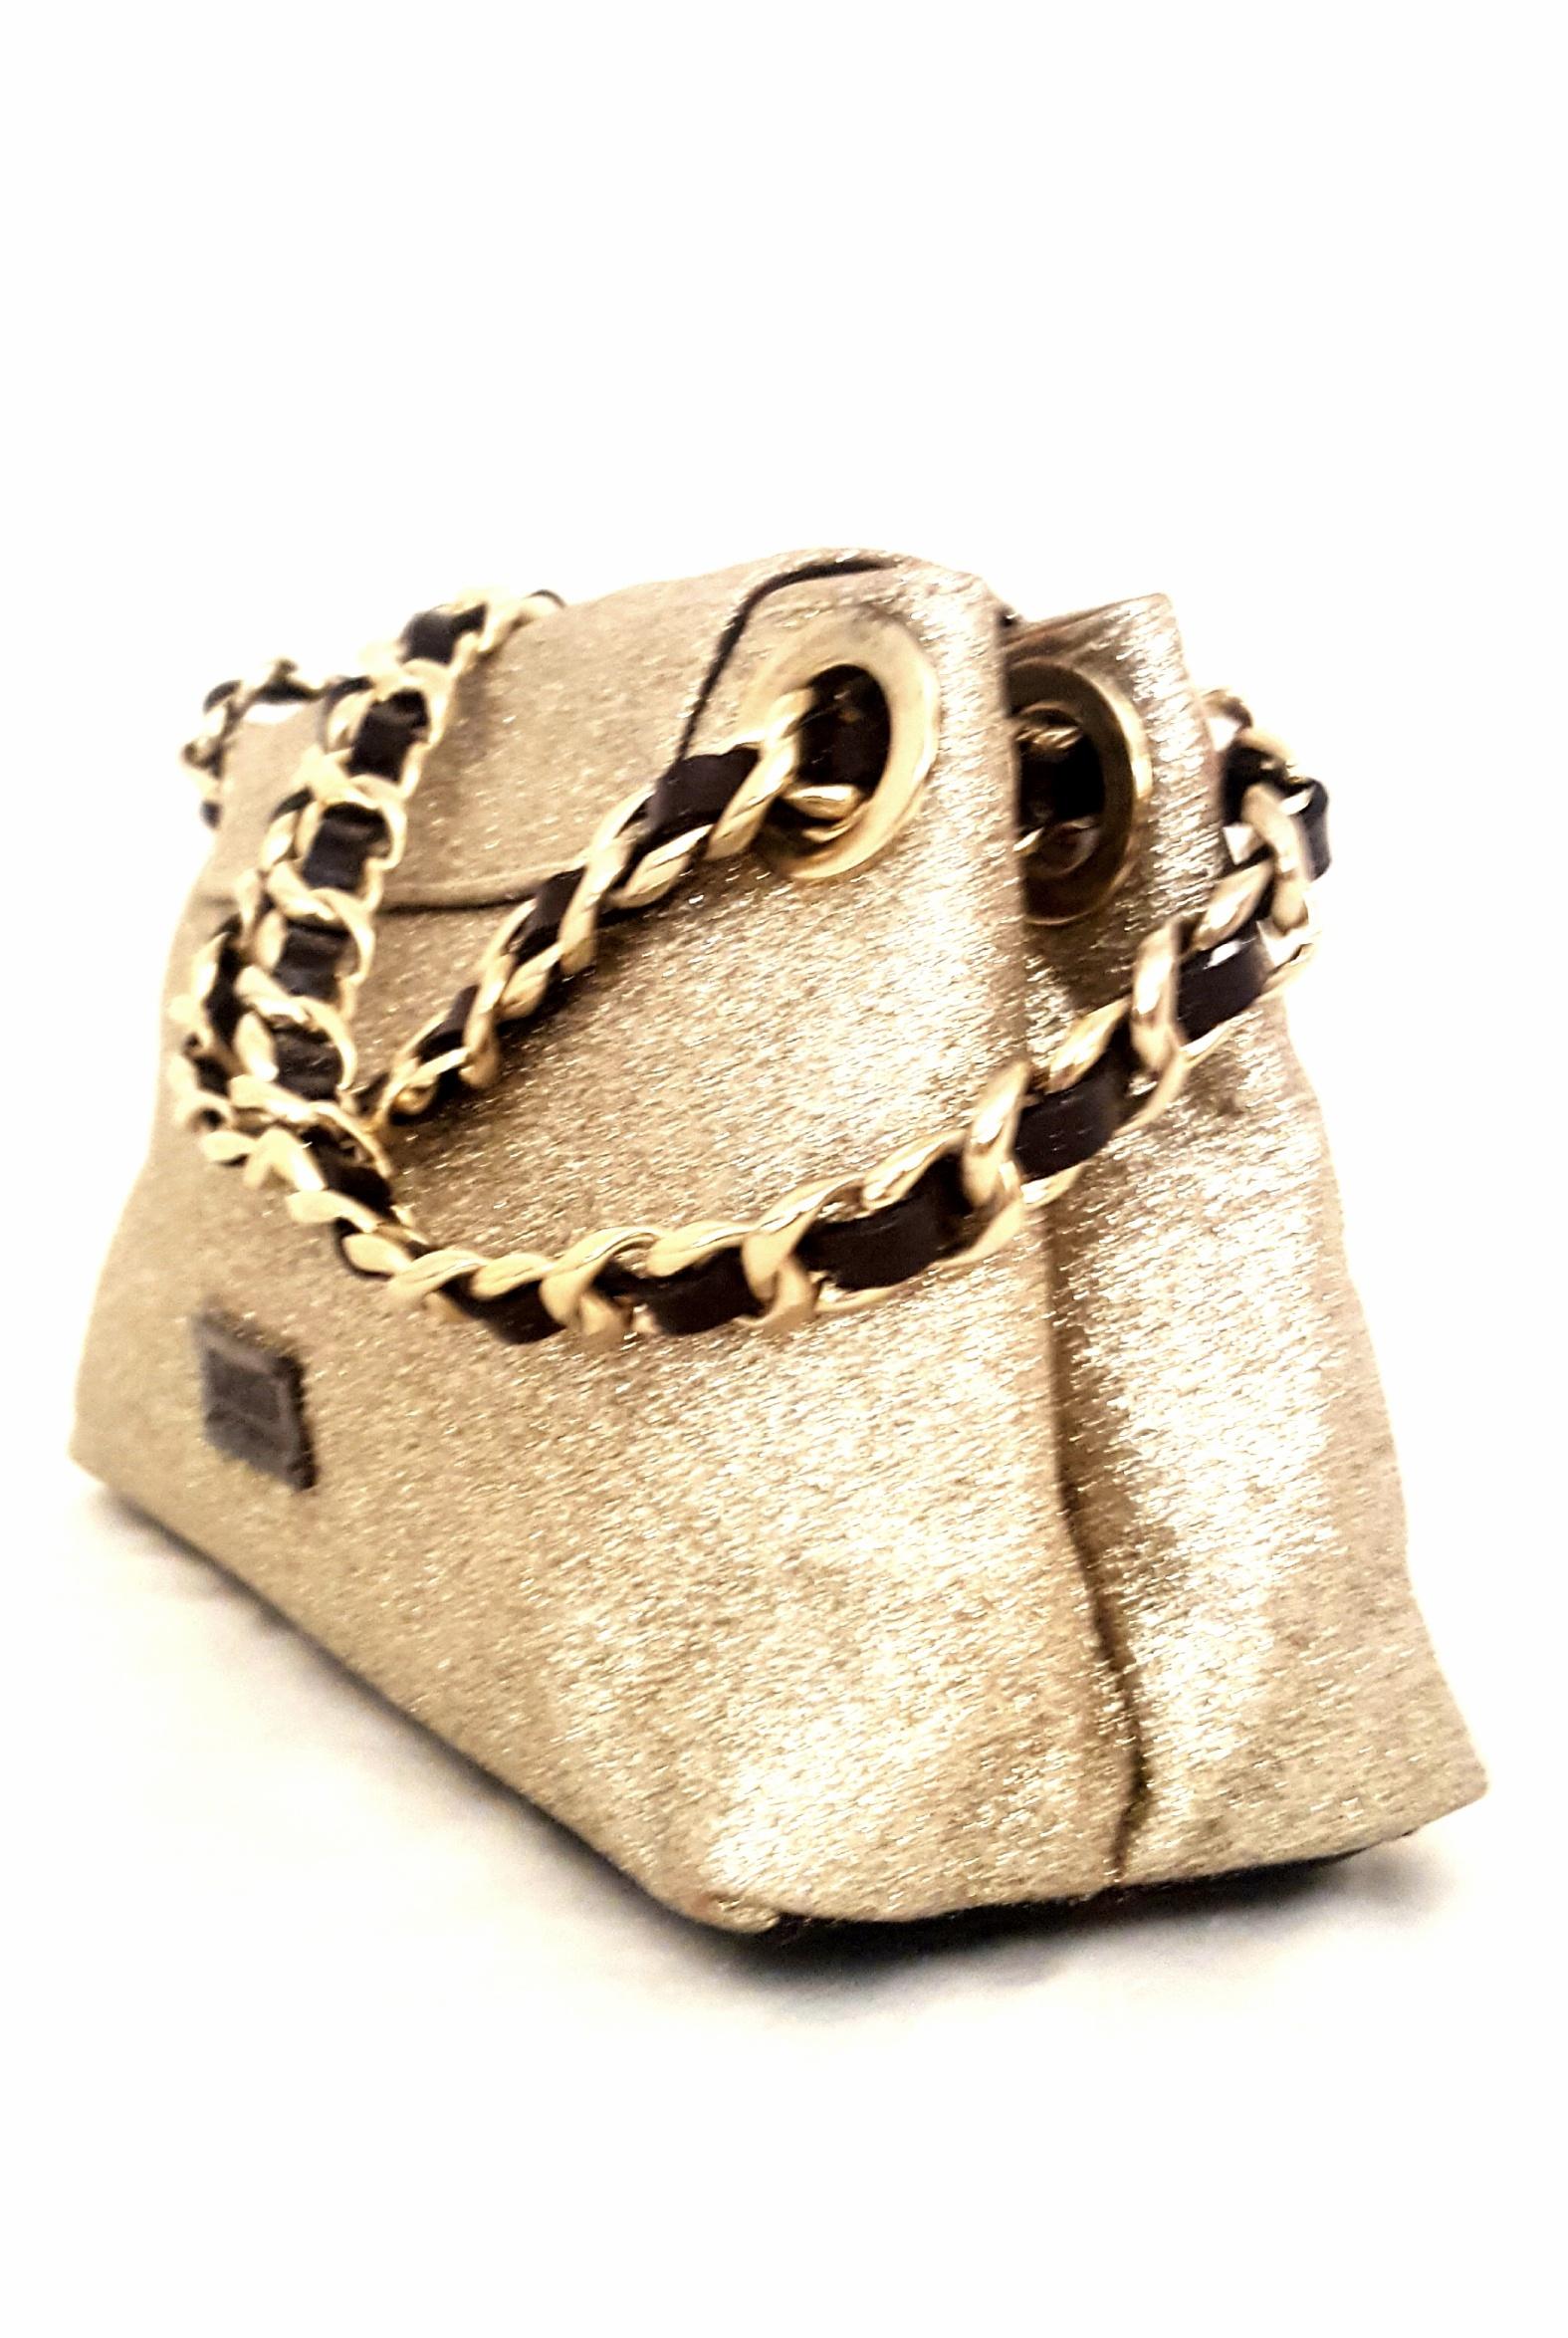 Moschino gold tone glitter leather bag with chain link and black leather threaded shoulder strap is perfect for both day and evening.   The interior is lined in gold tone satin divided in 2 pockets separated by center zippered pocket and a smaller